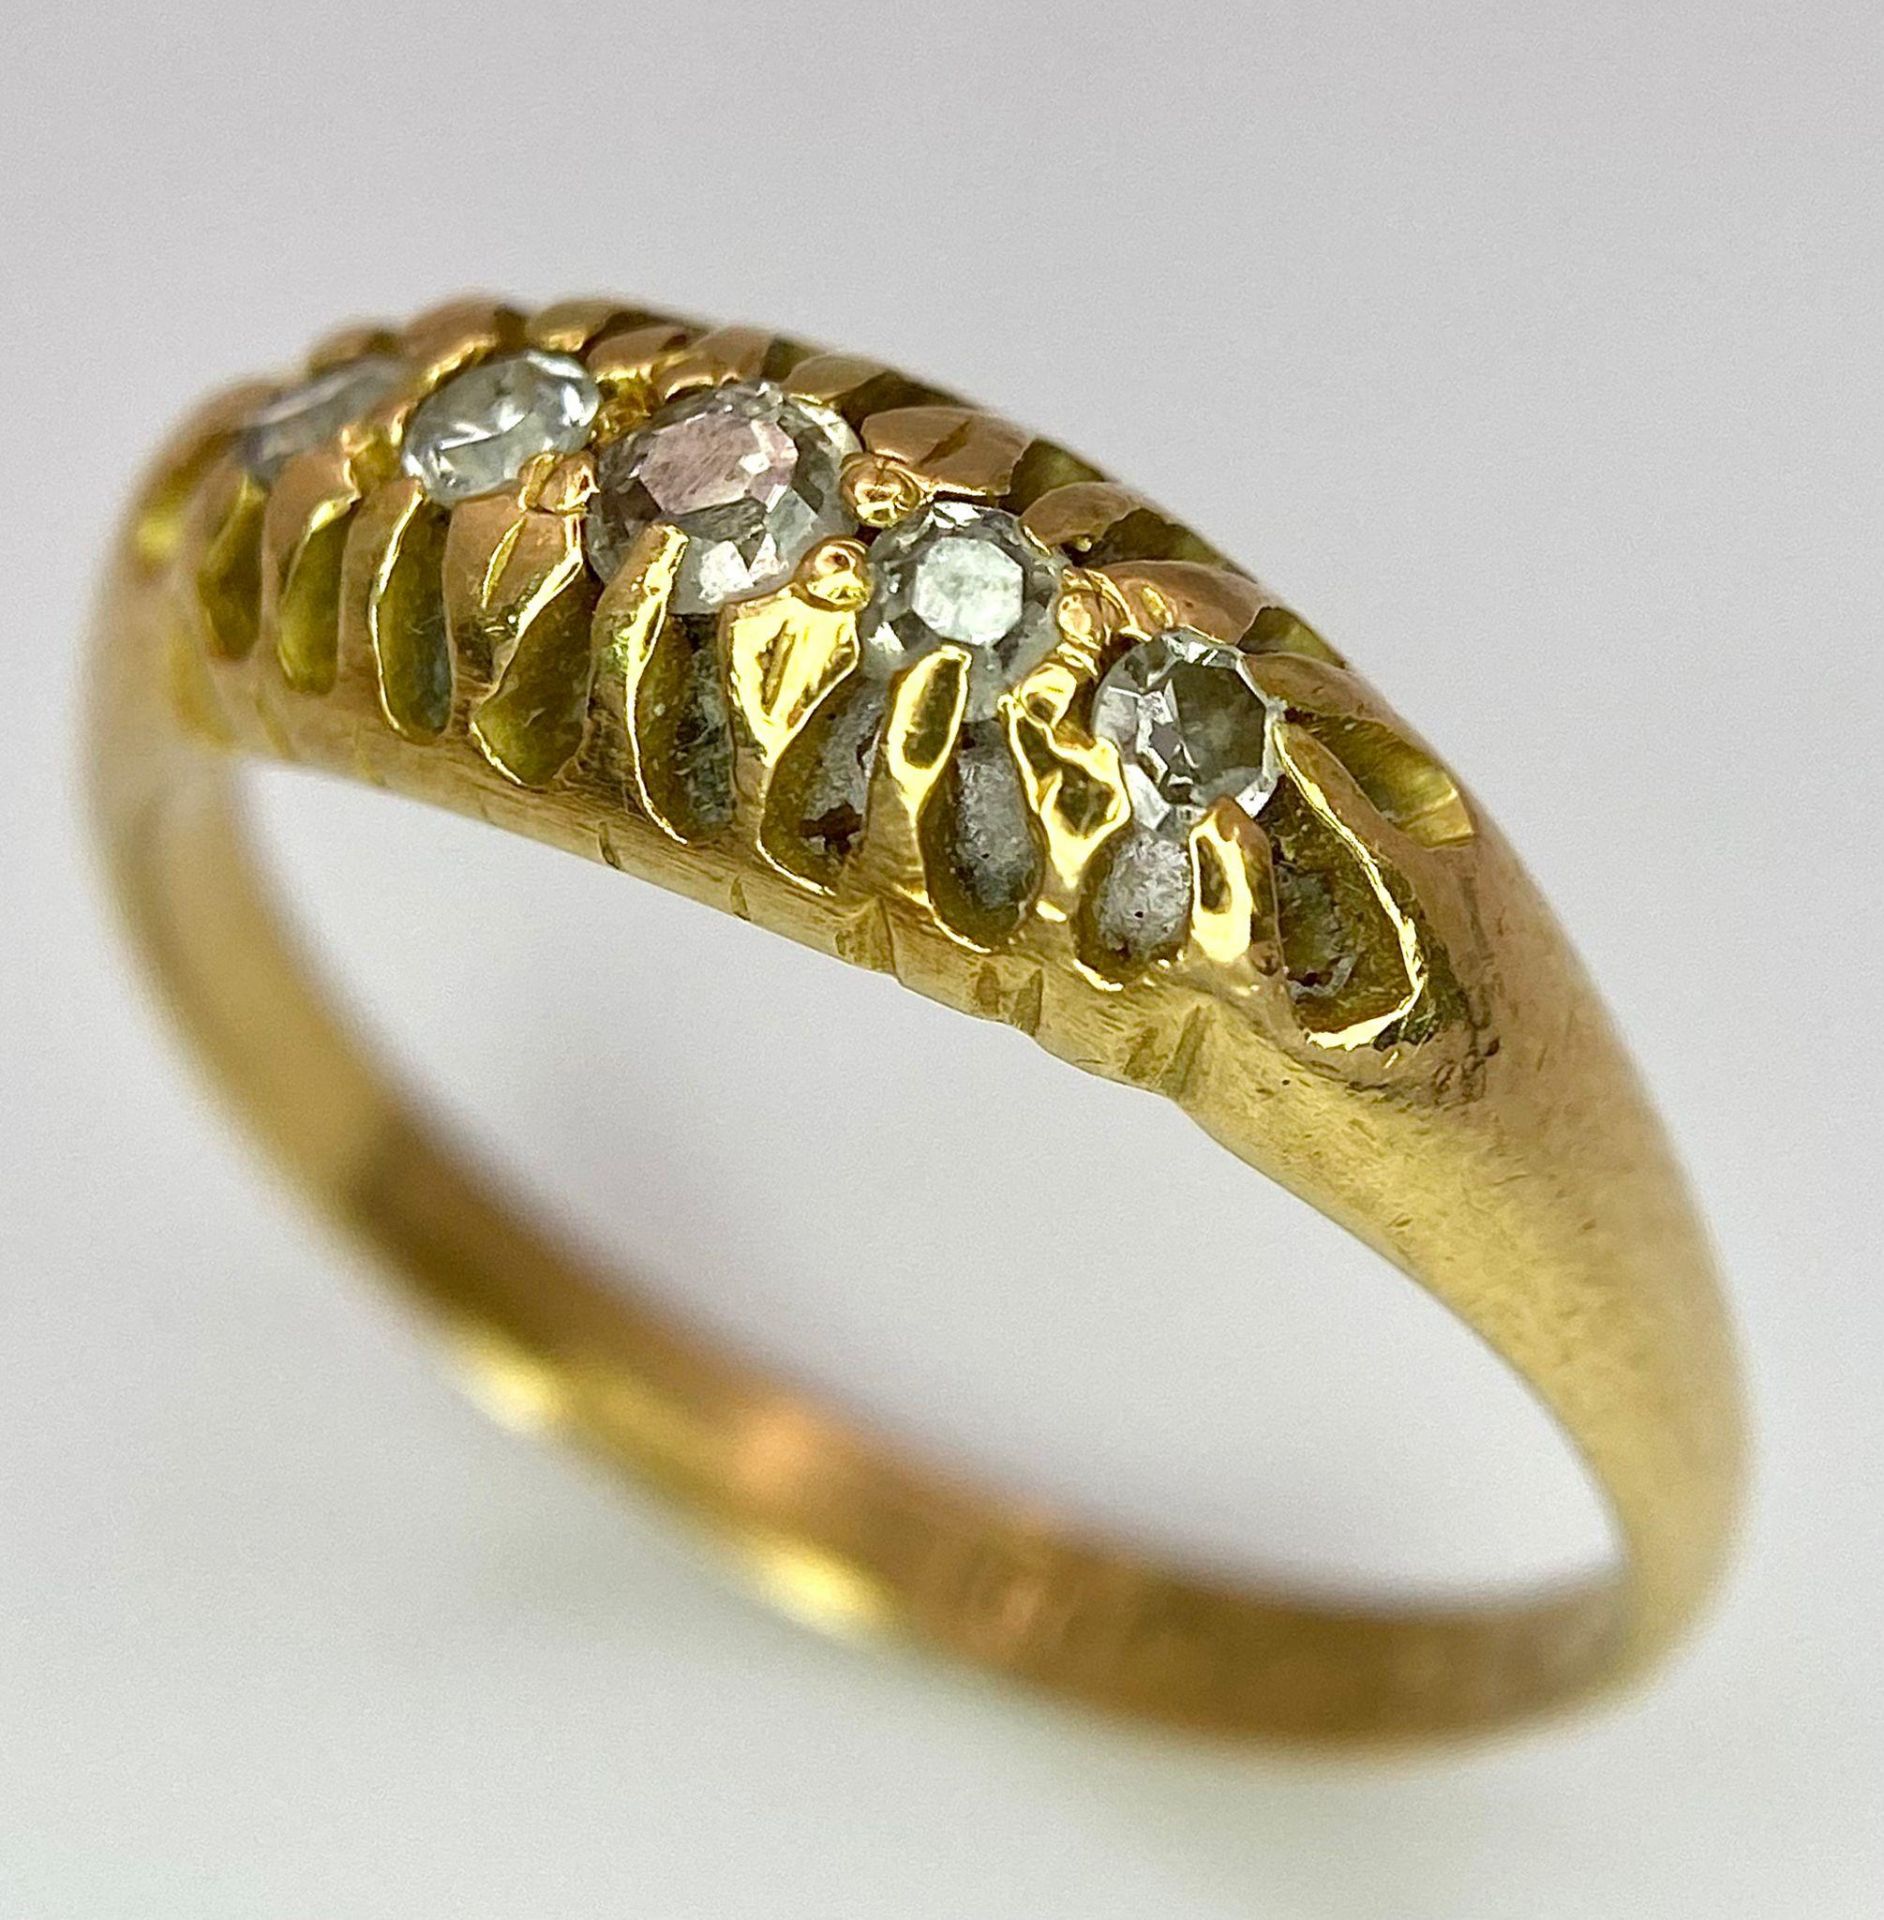 An 18 K yellow gold ring with a band of five diamonds, size: O, weight: 3.2 g.